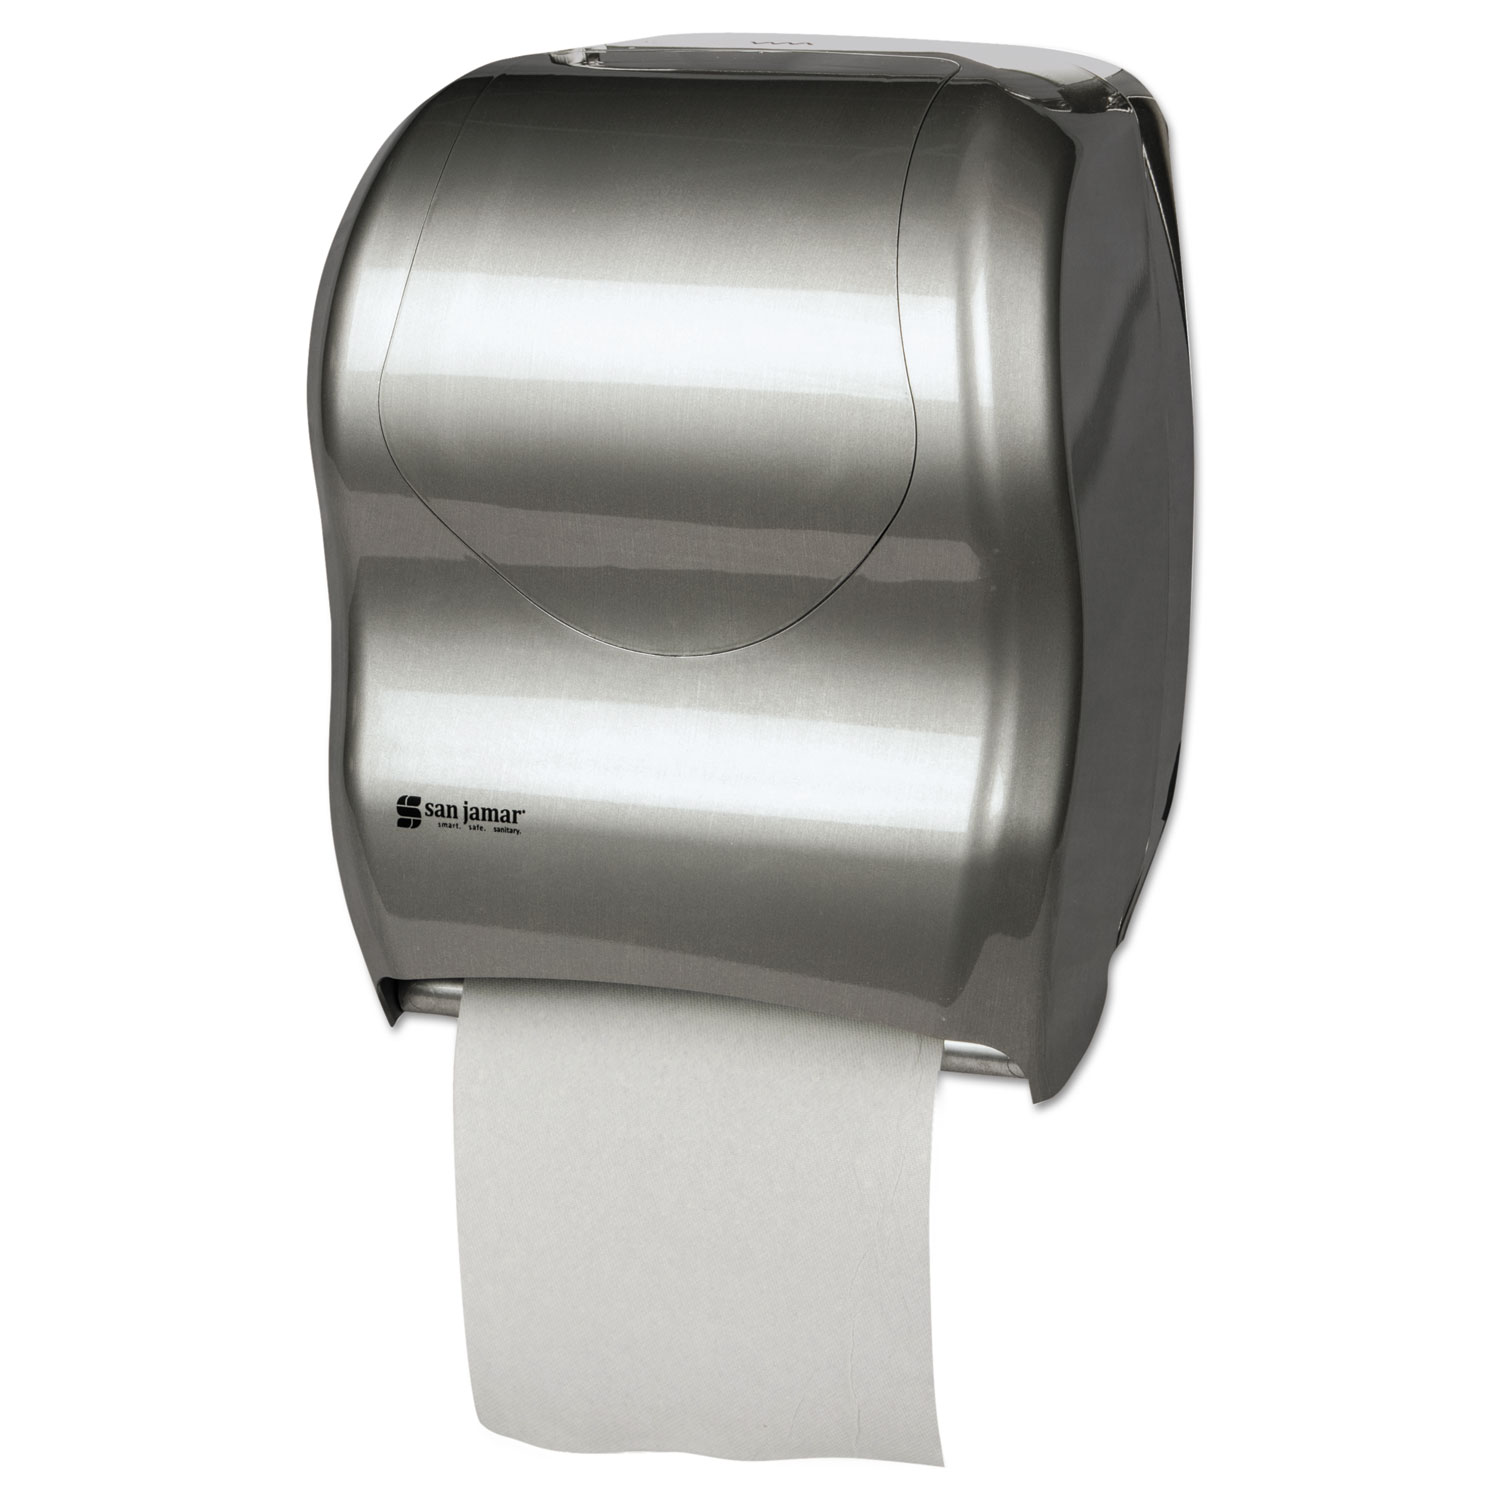 Tear-N-Dry Touchless Roll Towel Dispenser, 16 3/4 x 10 x 12 1/2, Silver